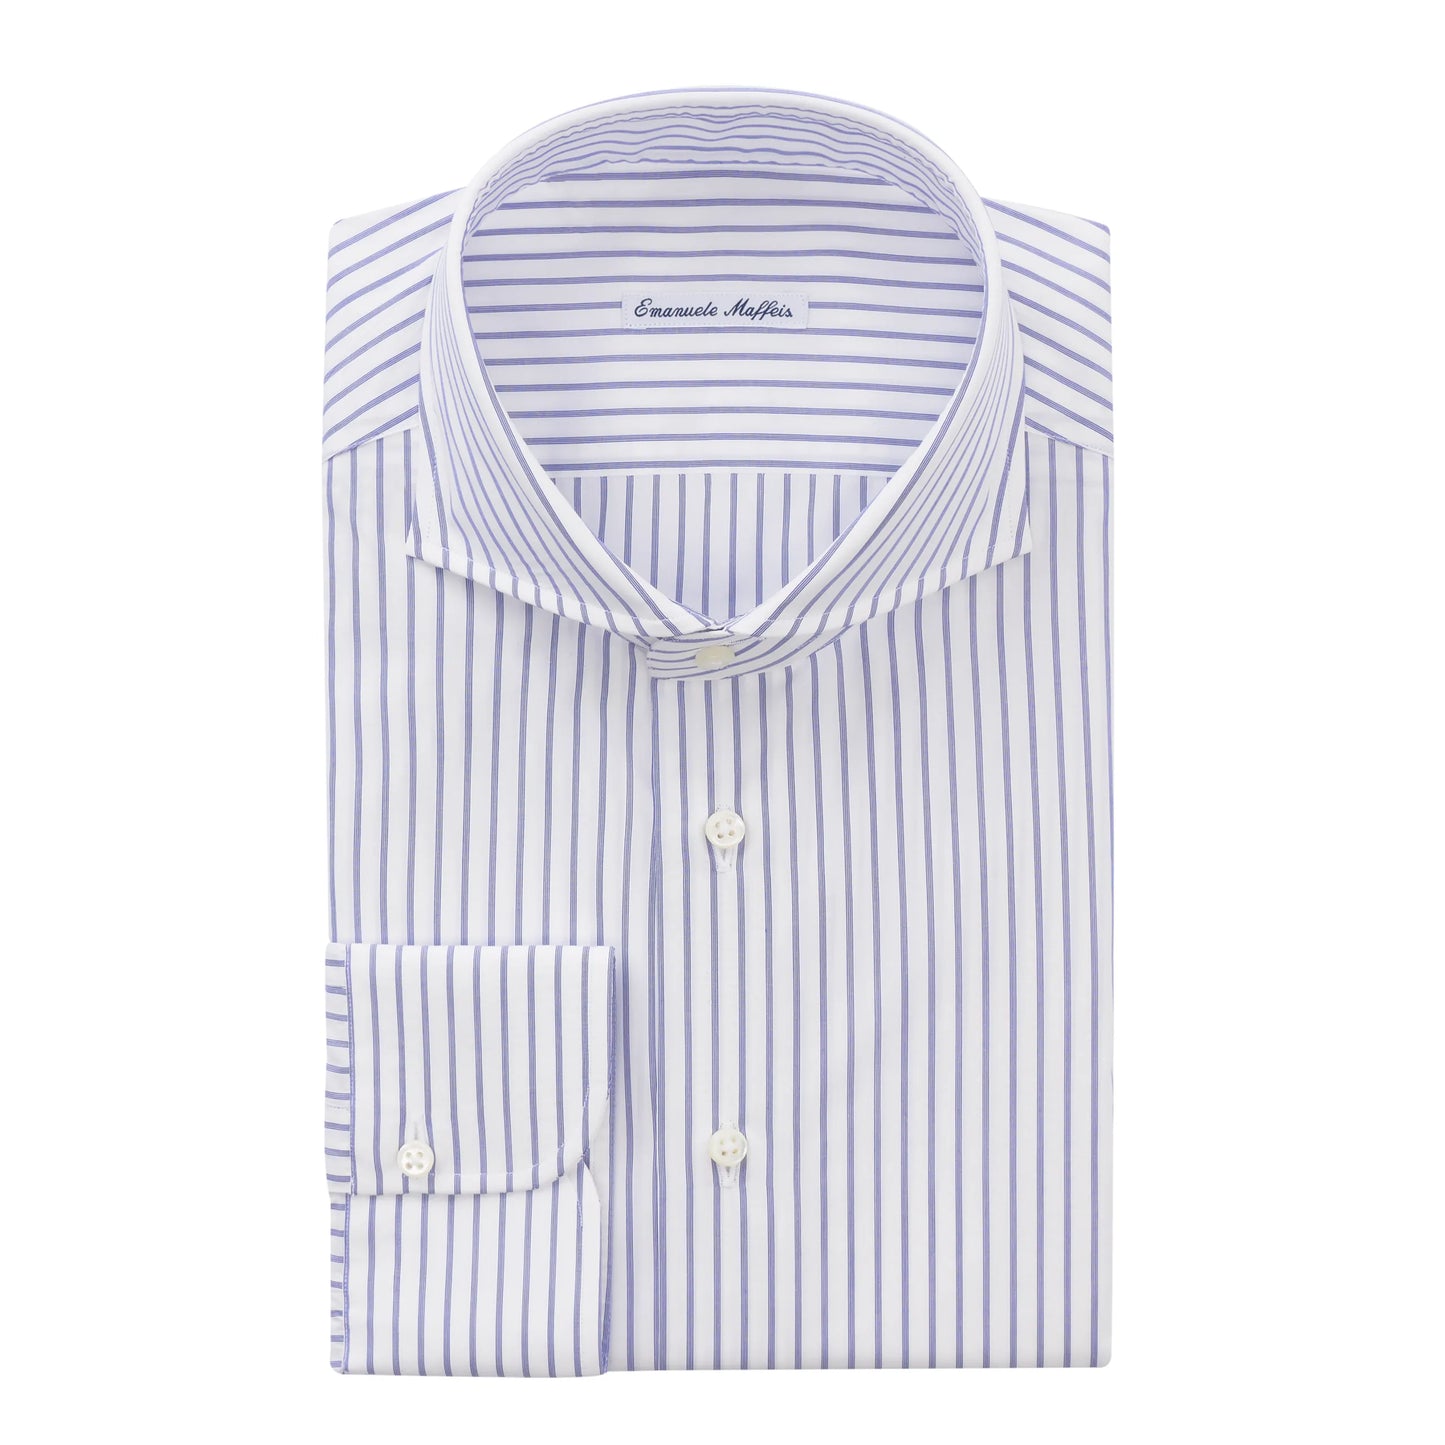 Striped Cotton White and Blue Shirt with Shark Collar